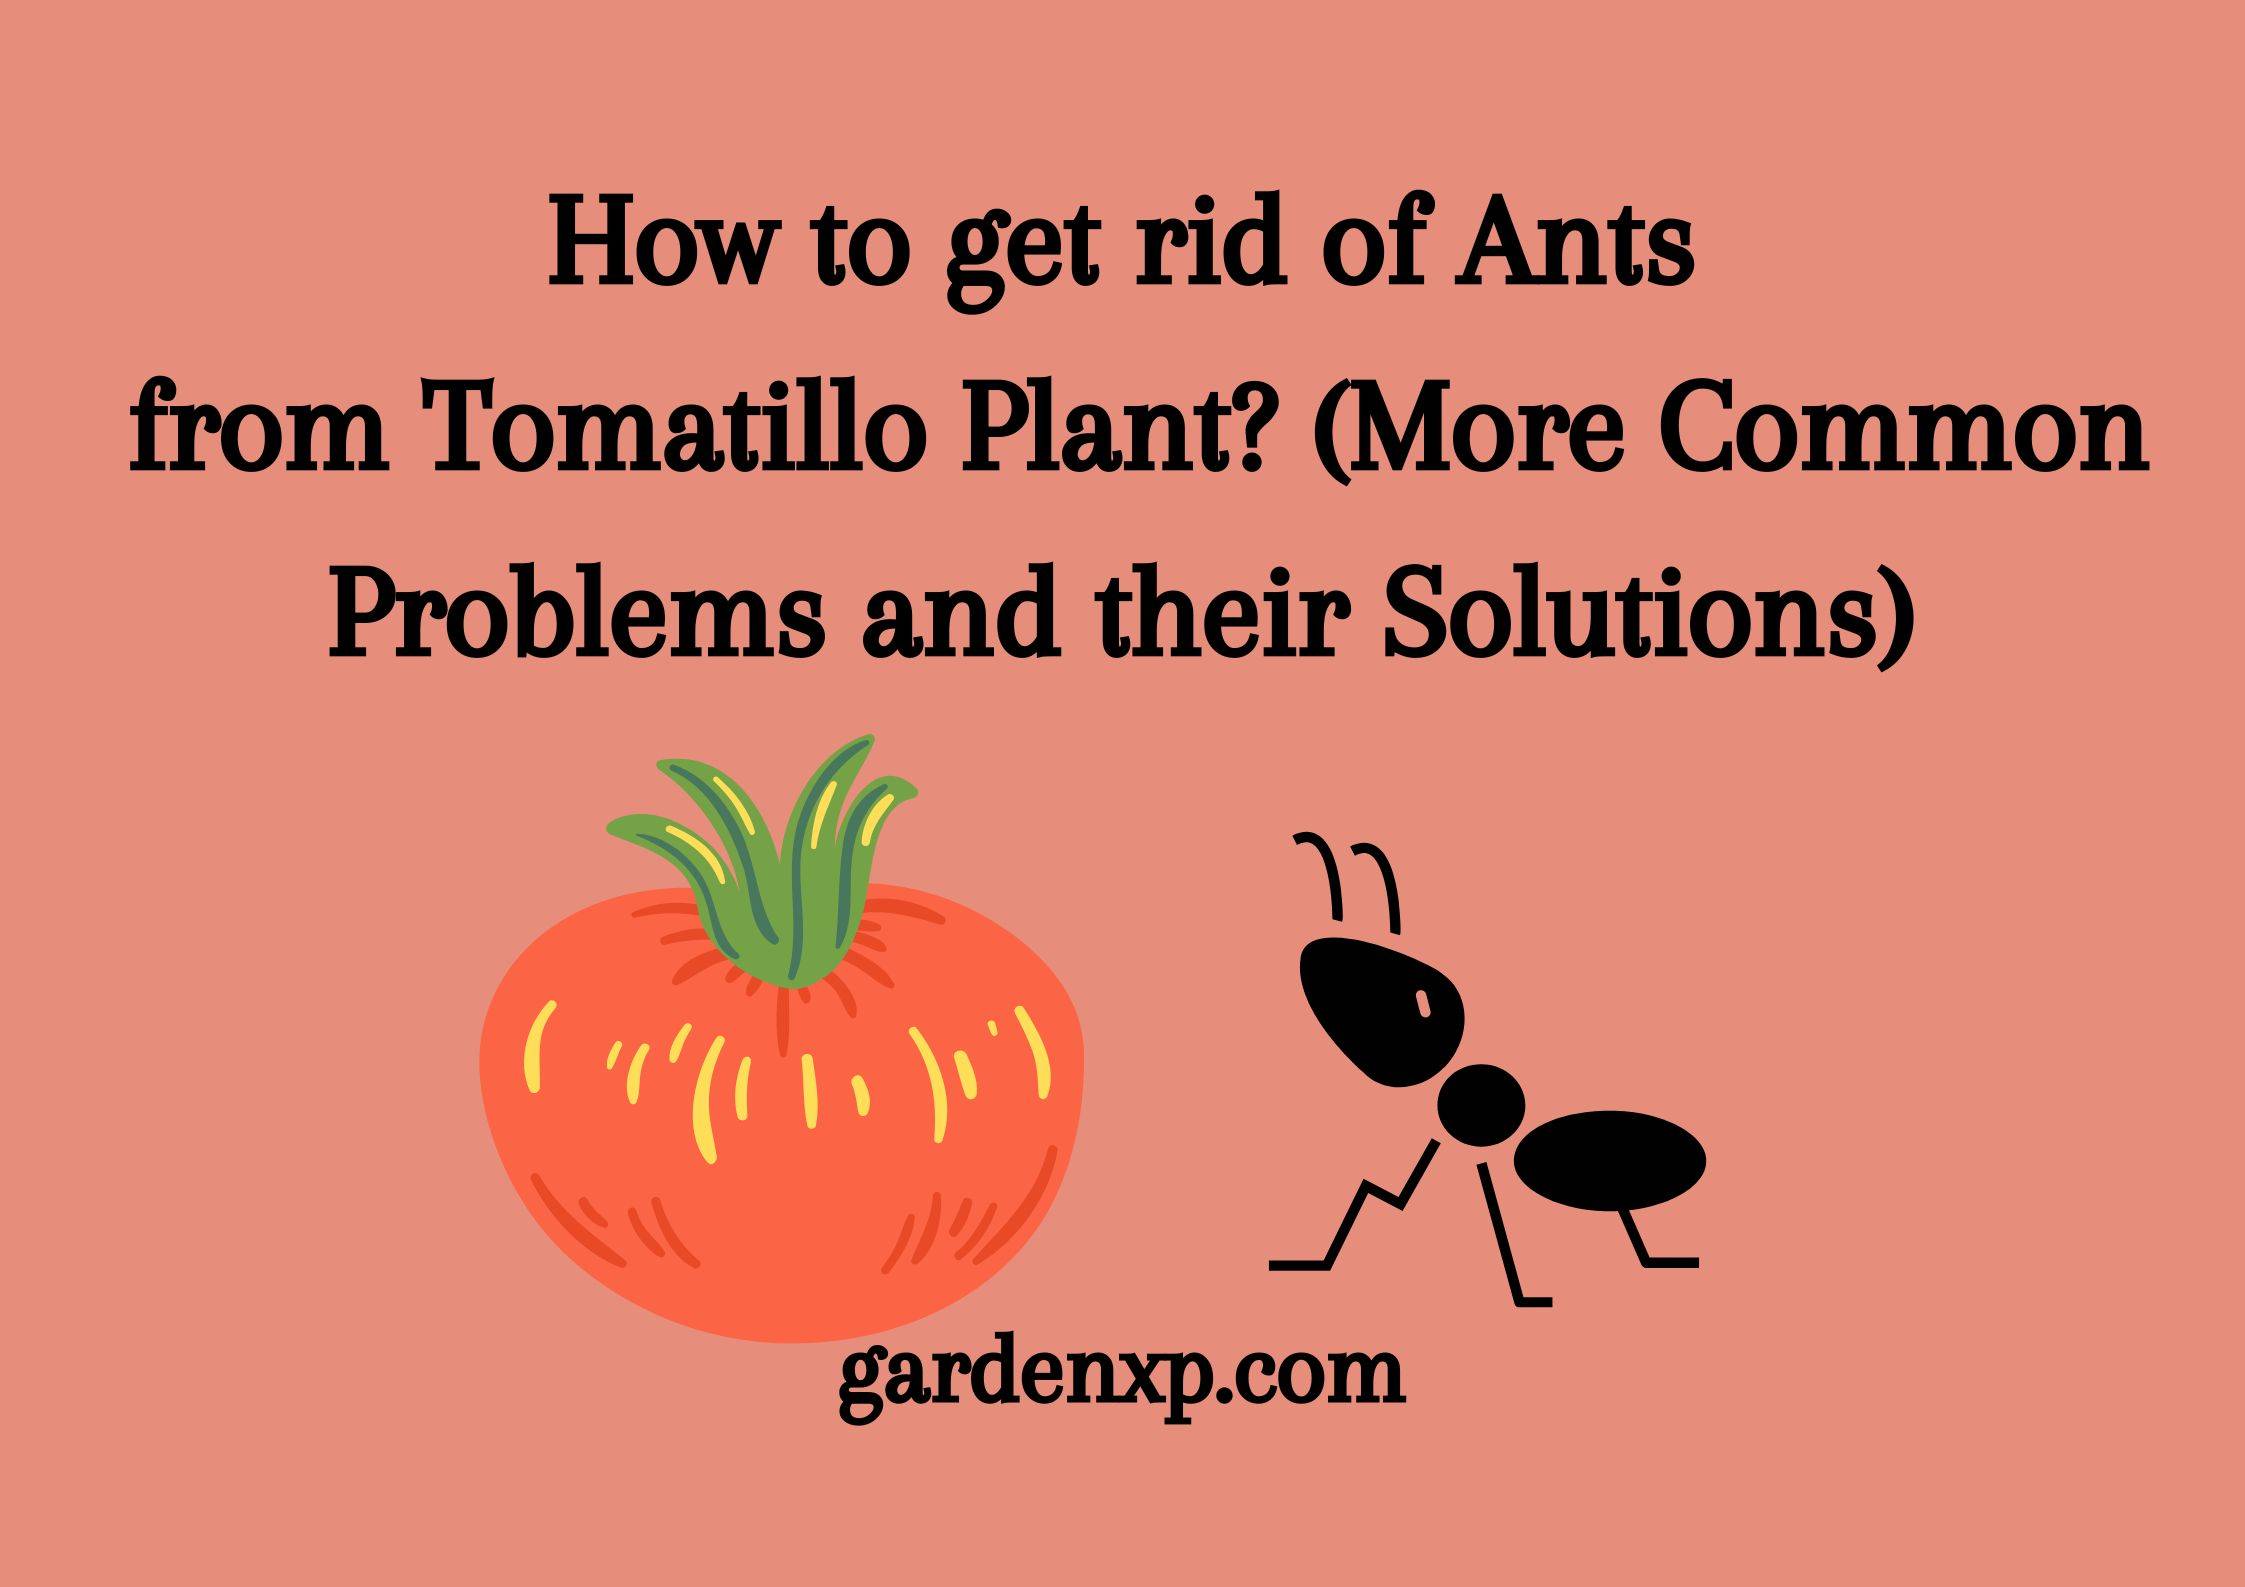 How to get rid of Ants from Tomatillo Plant? (More Common Problems and their Solutions)